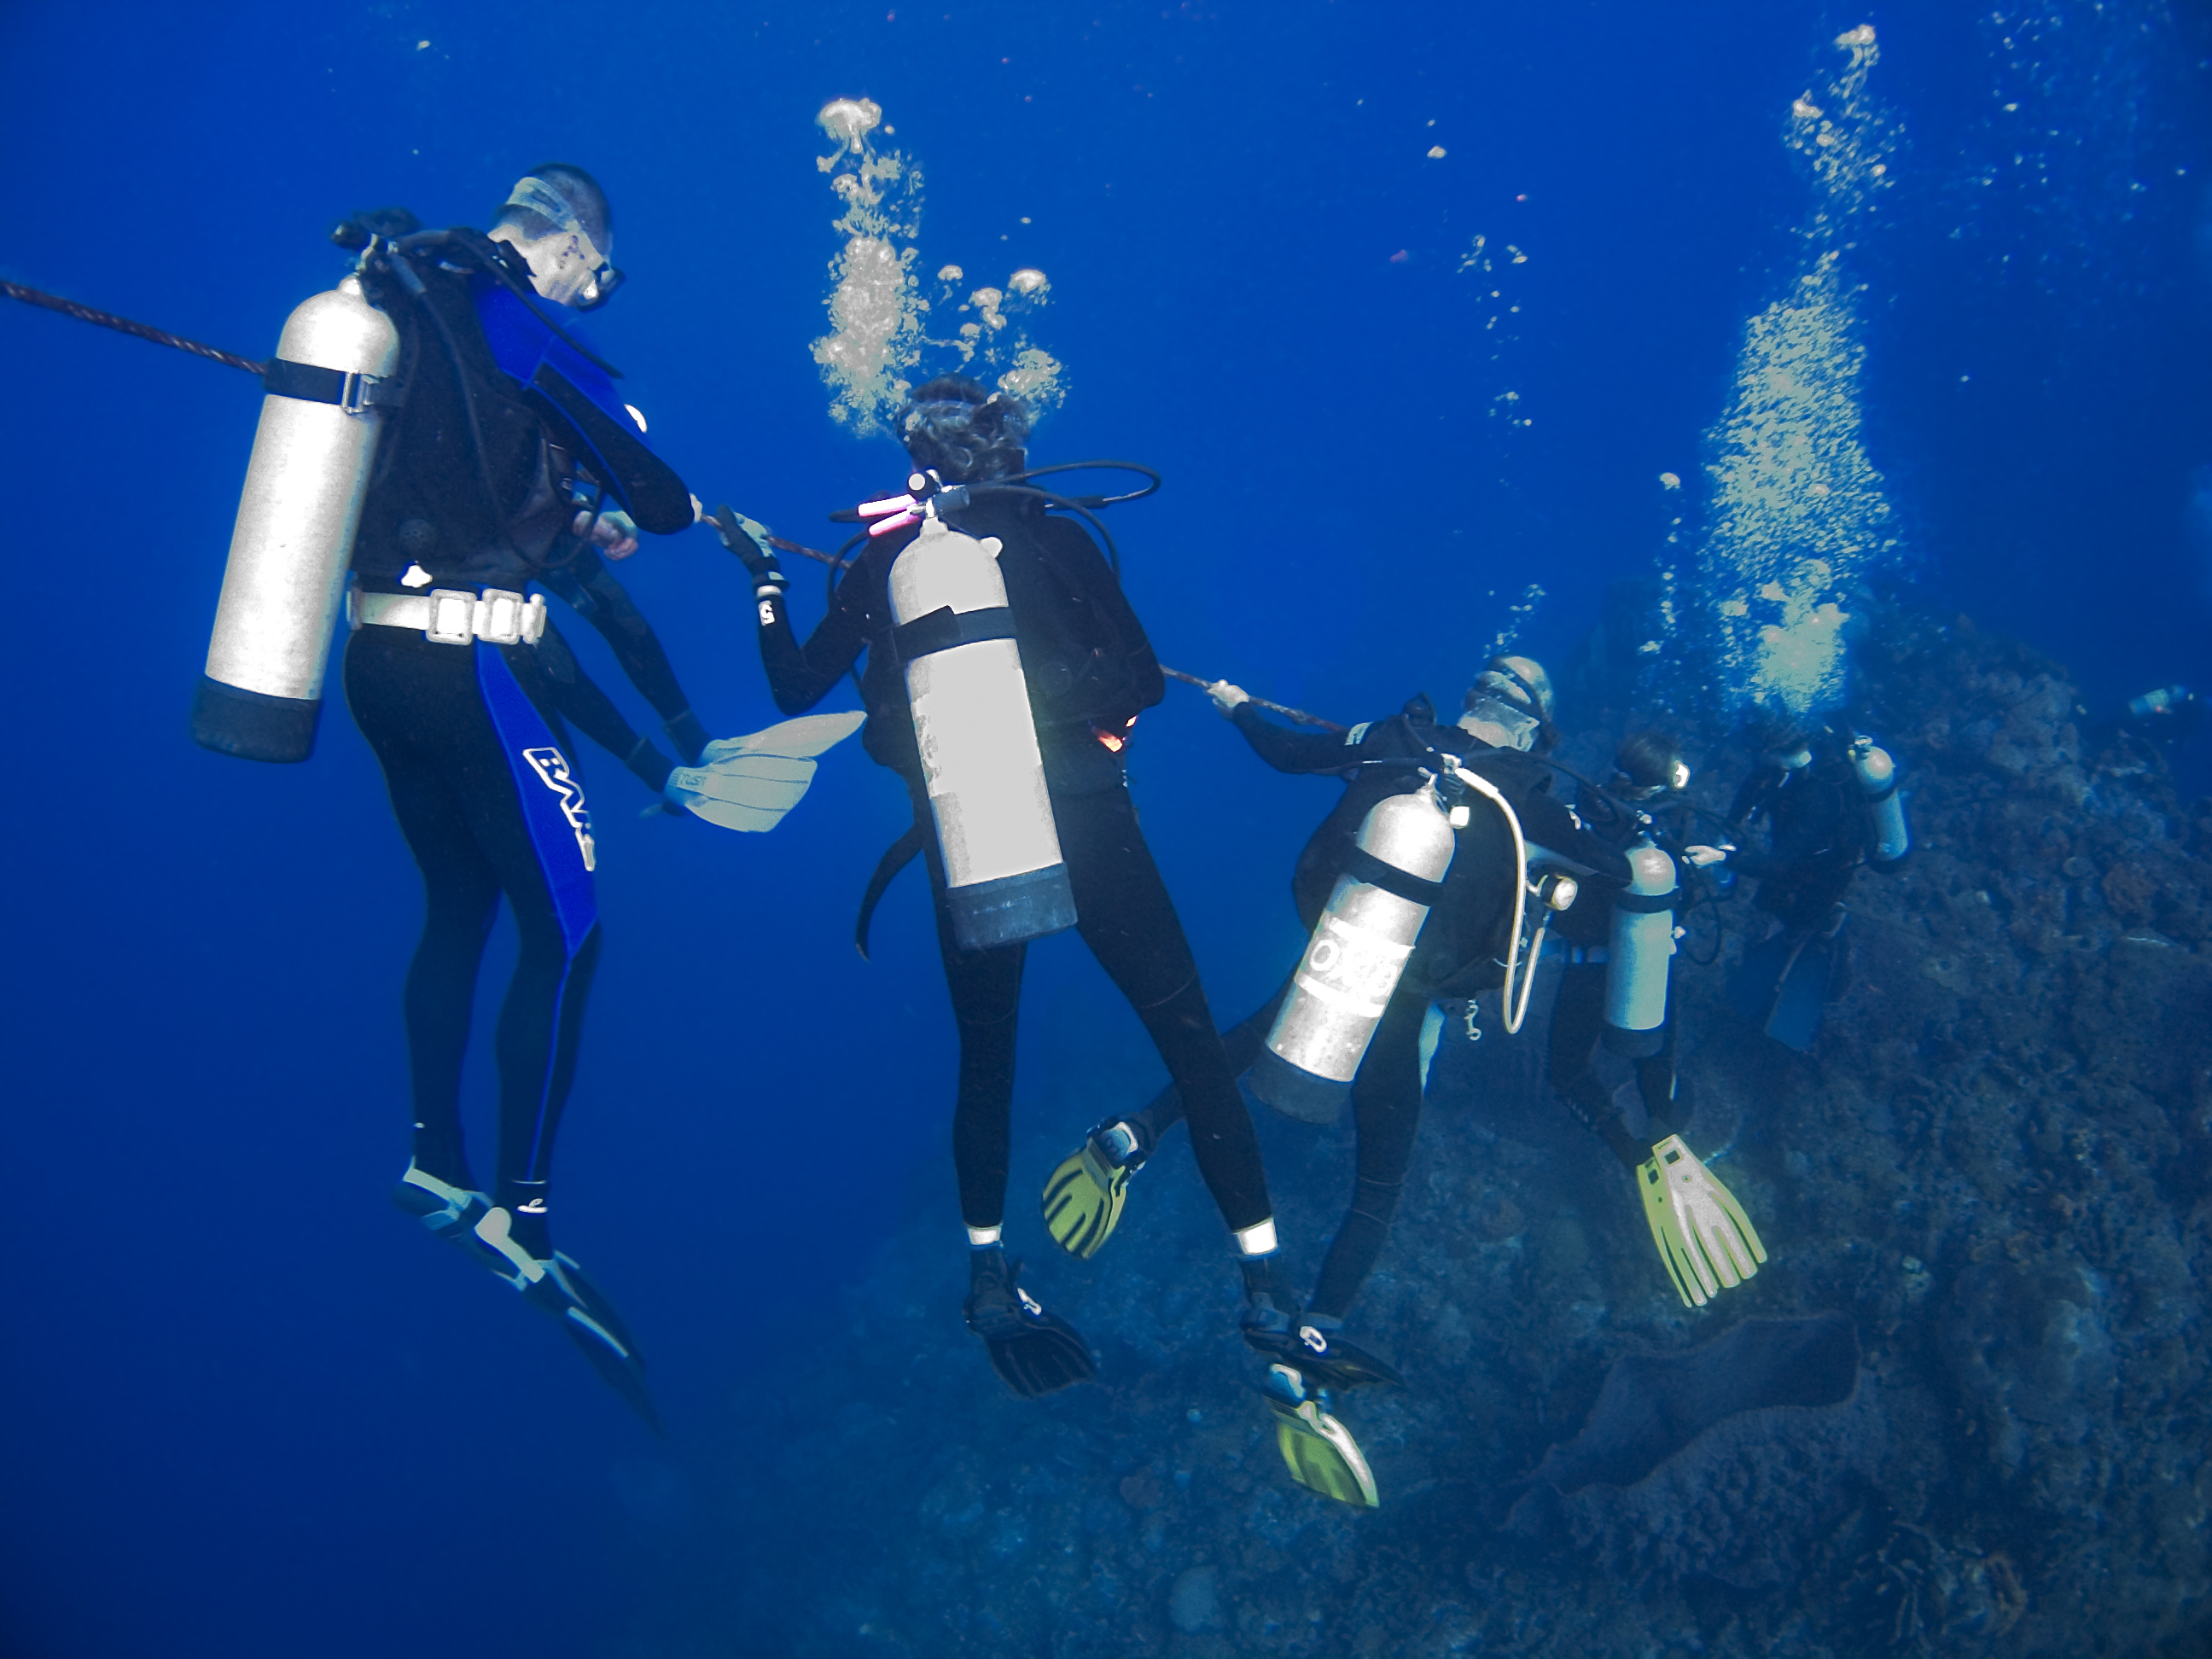 Group of divers decide to take deep stop at 65ft as part of their ascent back  to the surface